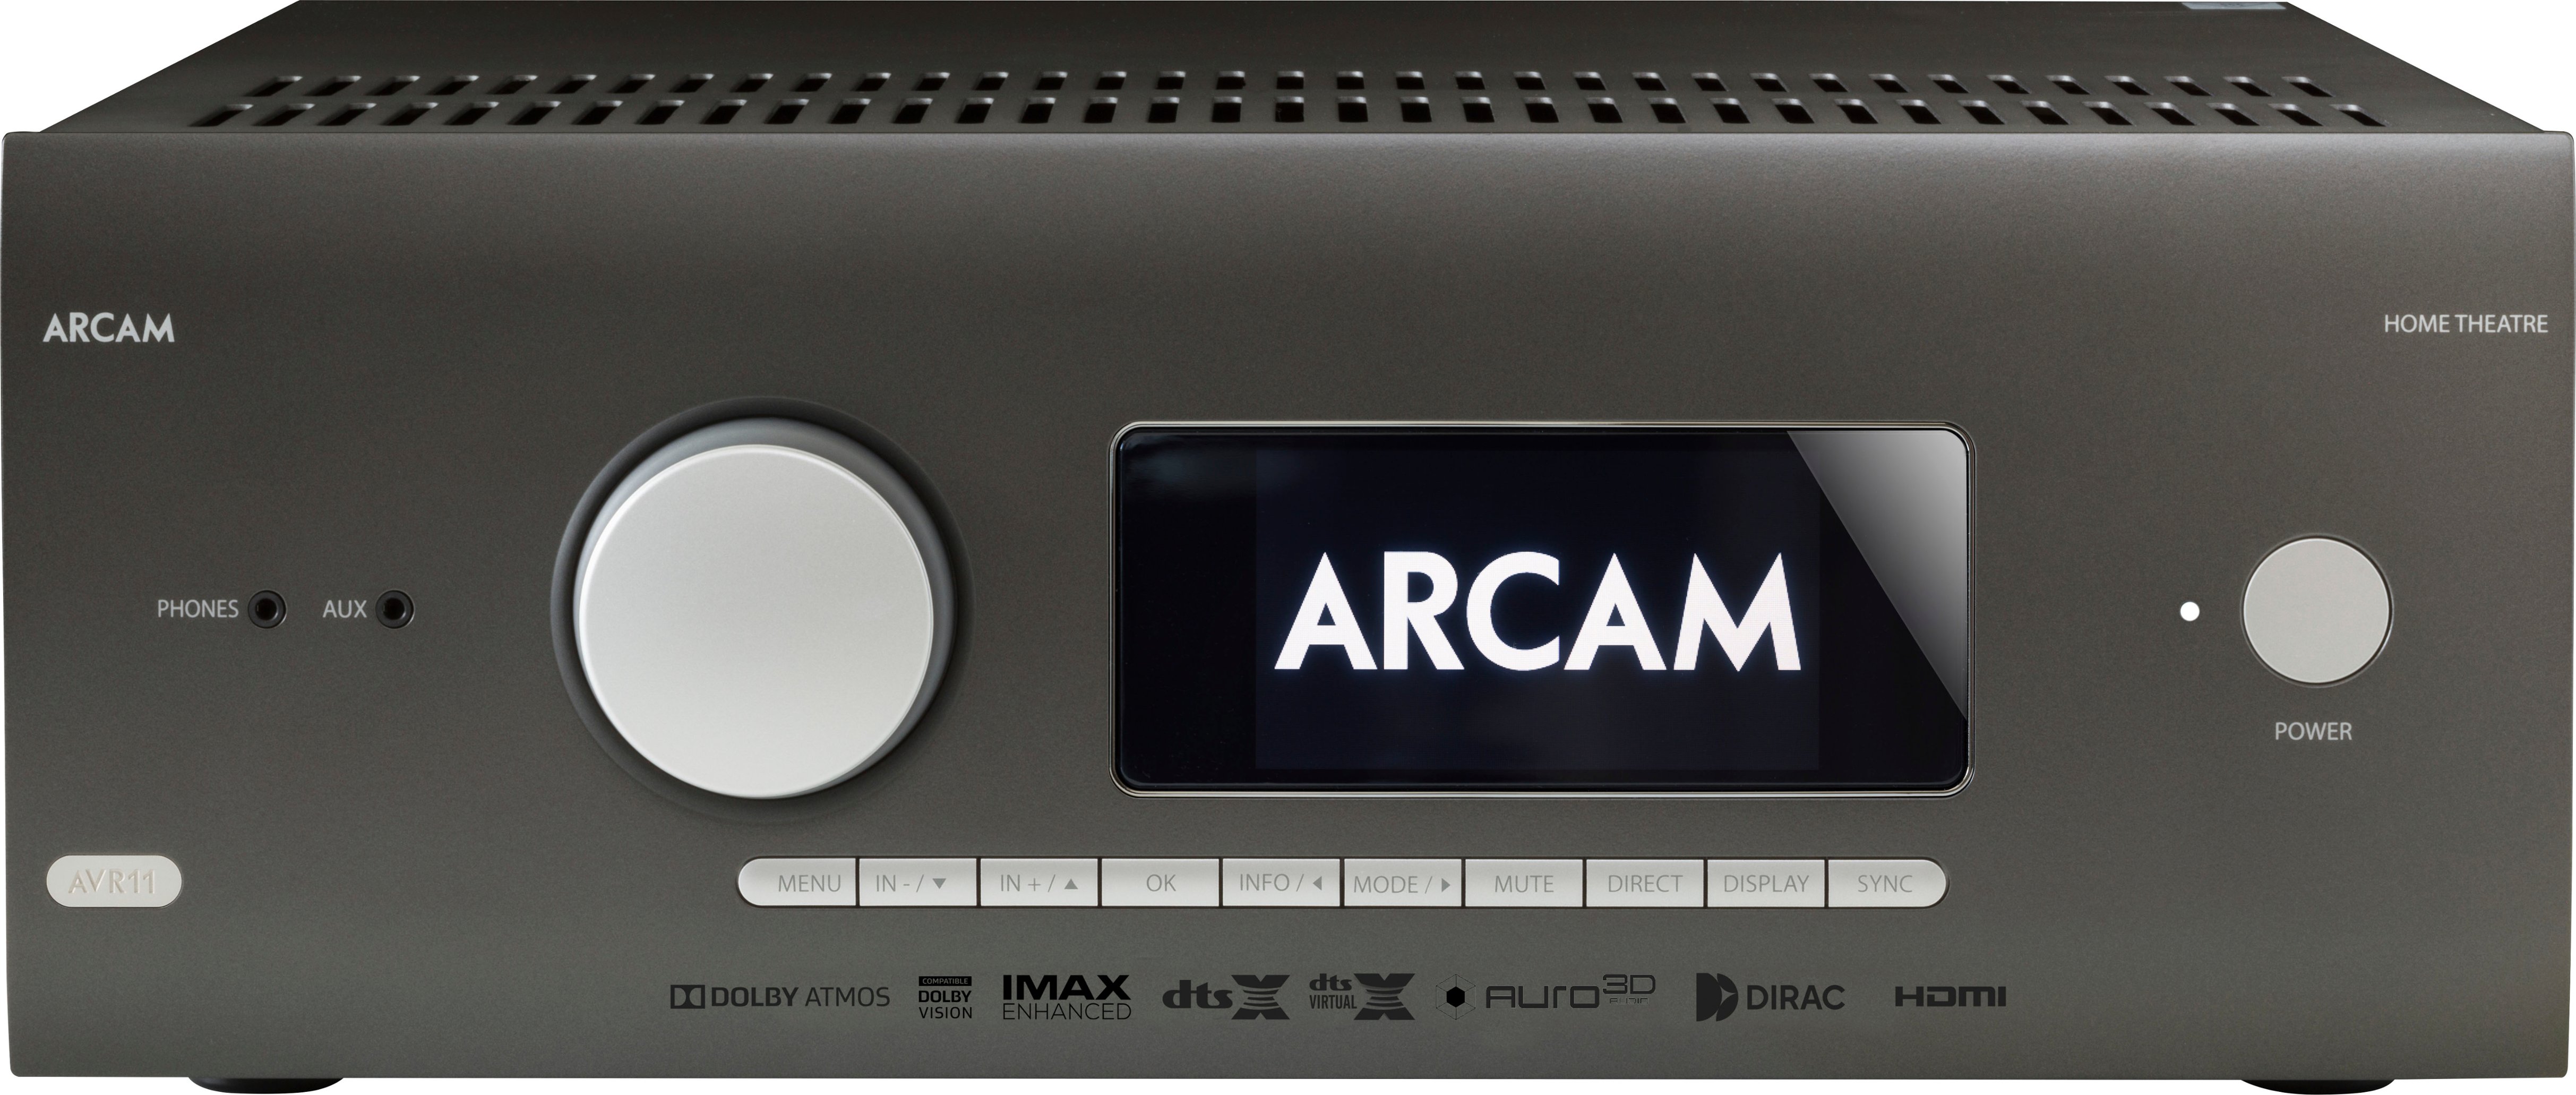 Angle View: Arcam - AVR11 595W 7.1.4-Ch. Bluetooth capable With Google Cast and 8K Ultra HD HDR Compatible A/V Home Theater Receiver - Gray